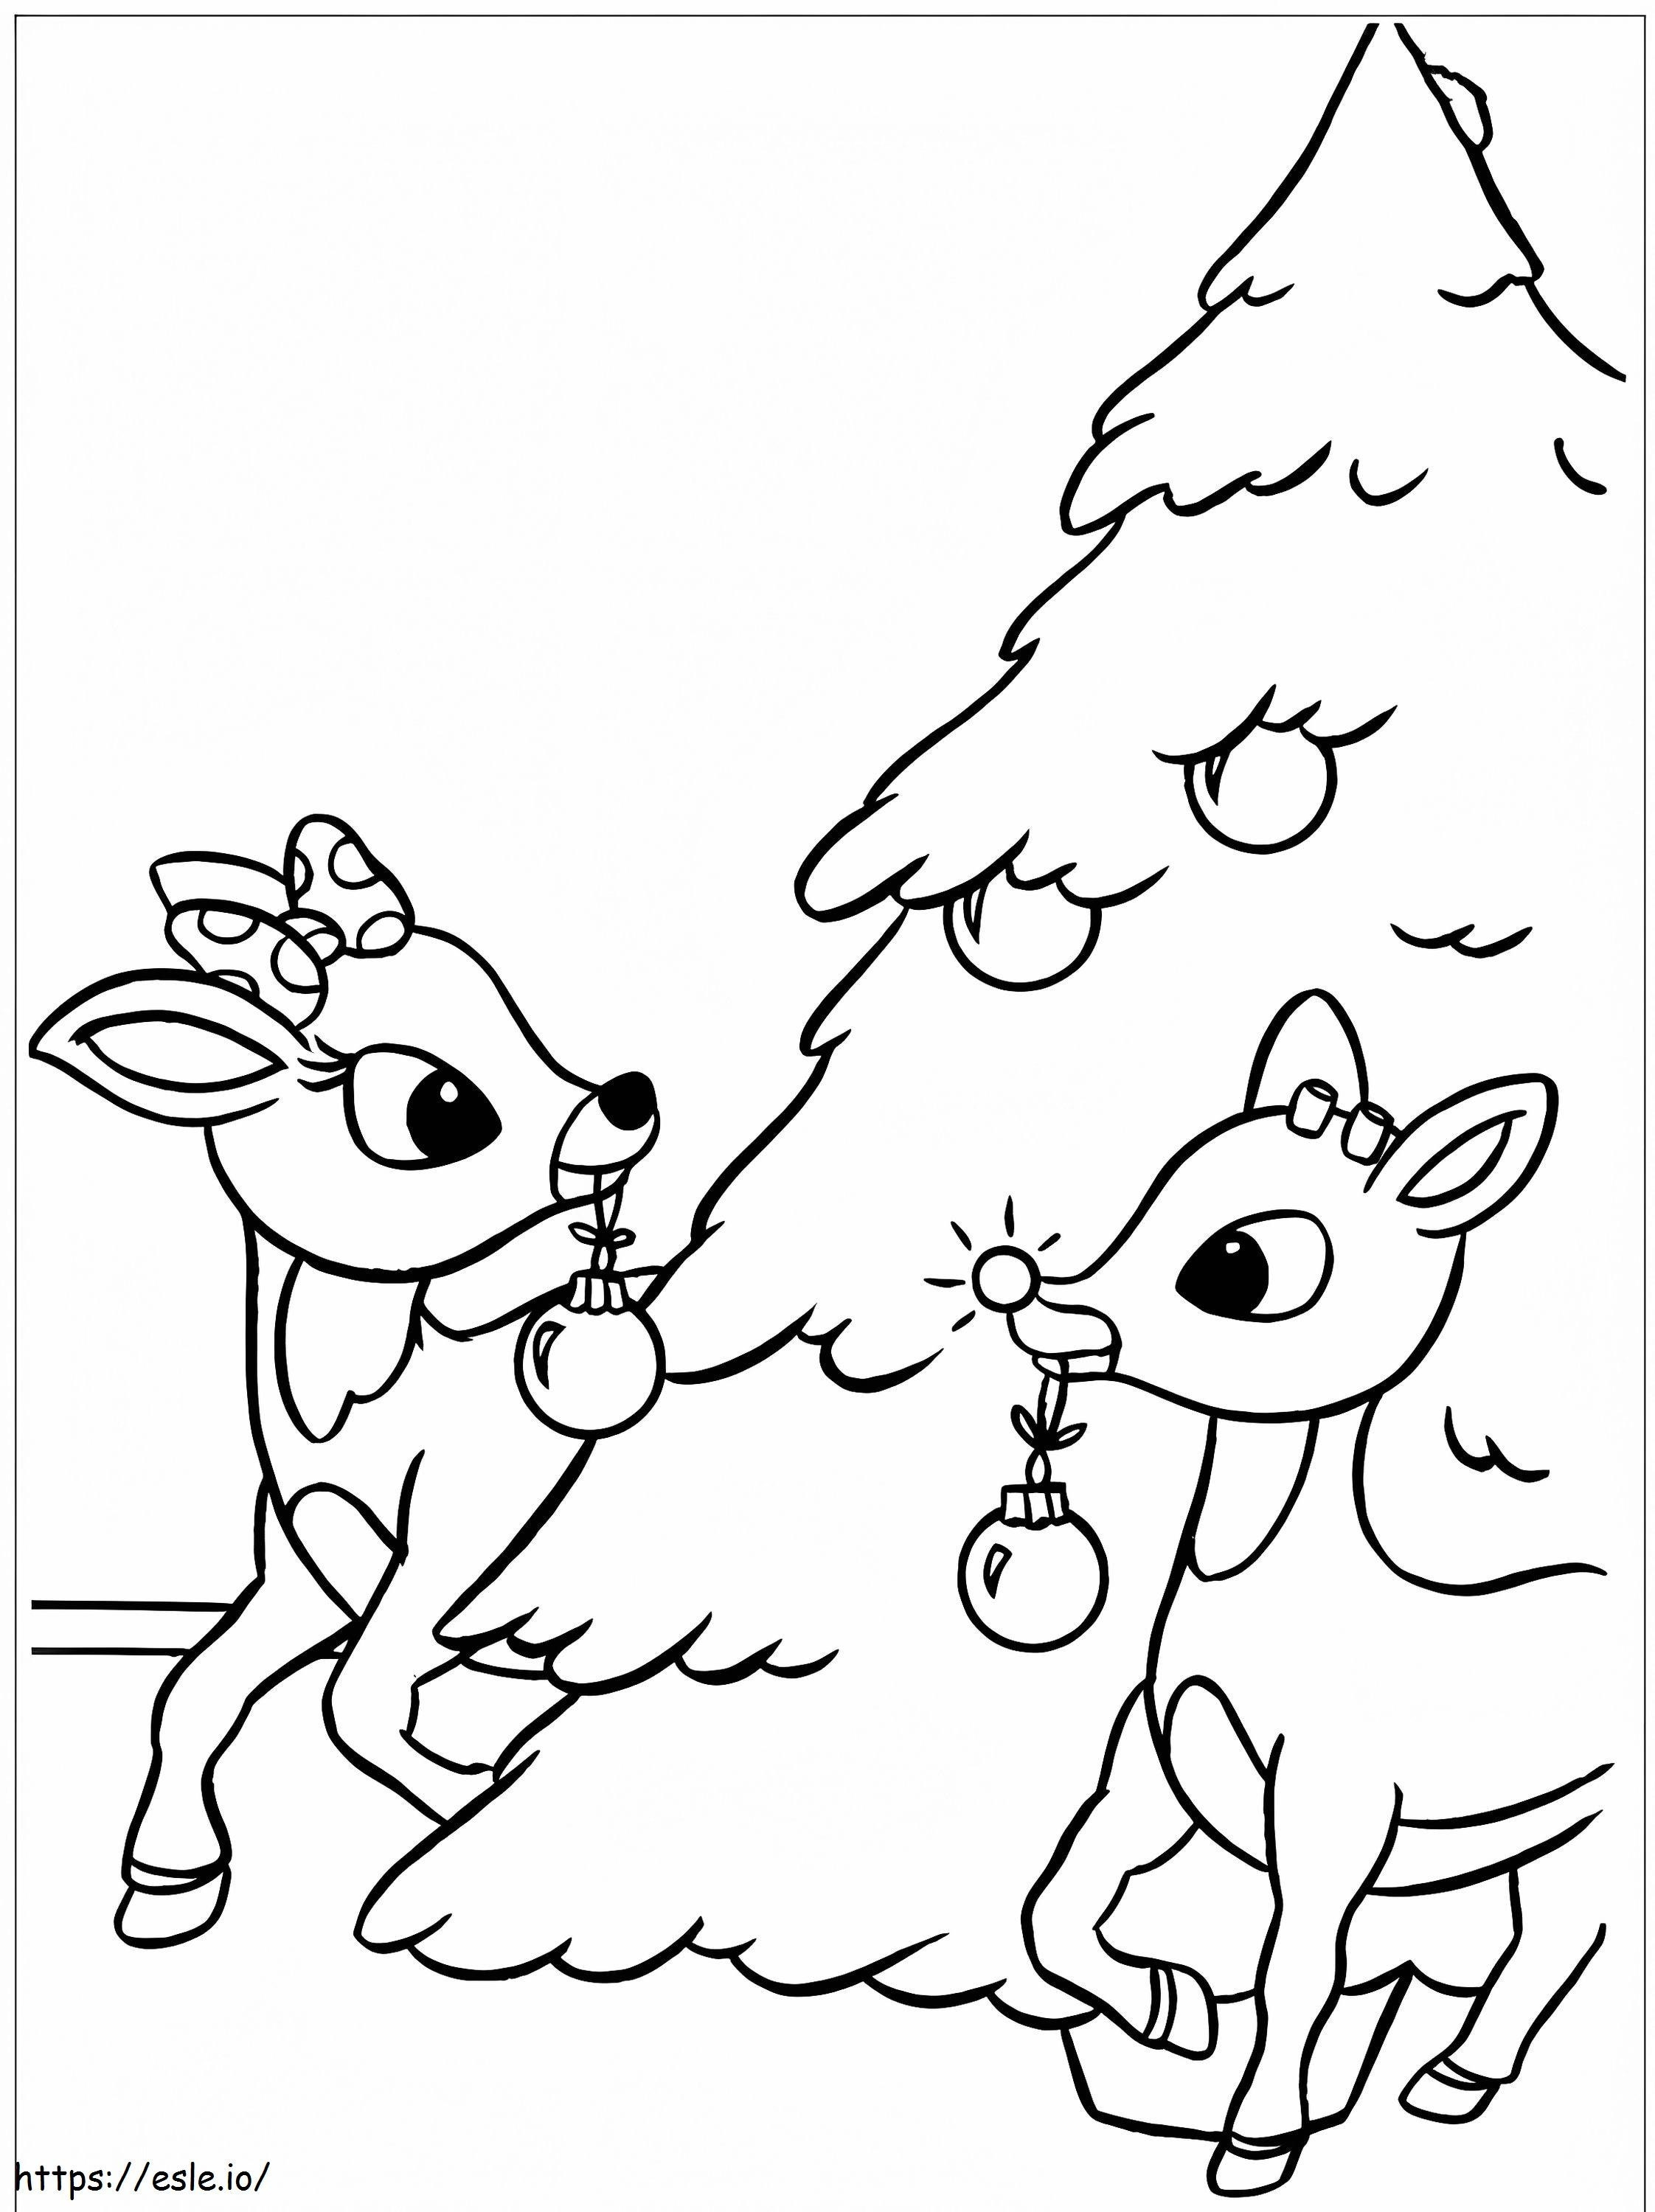 Rudolph The Red Nose Reindeer coloring page